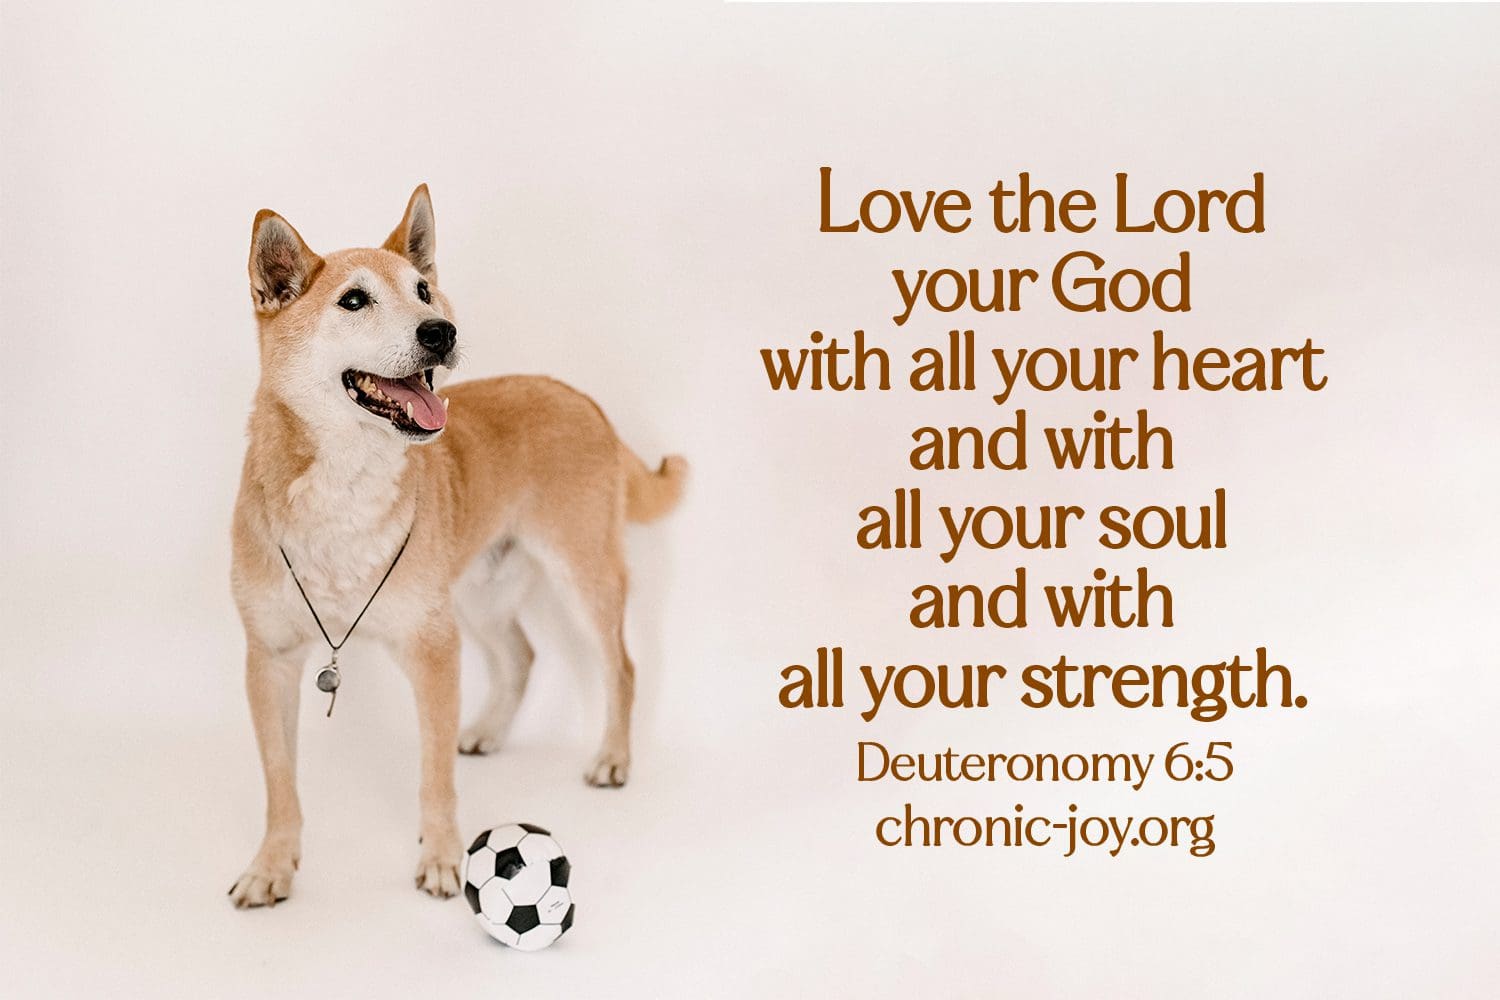 "Love the Lord your God with all your heart and with all your soul and with all your strength." (Deuteronomy 6:5)